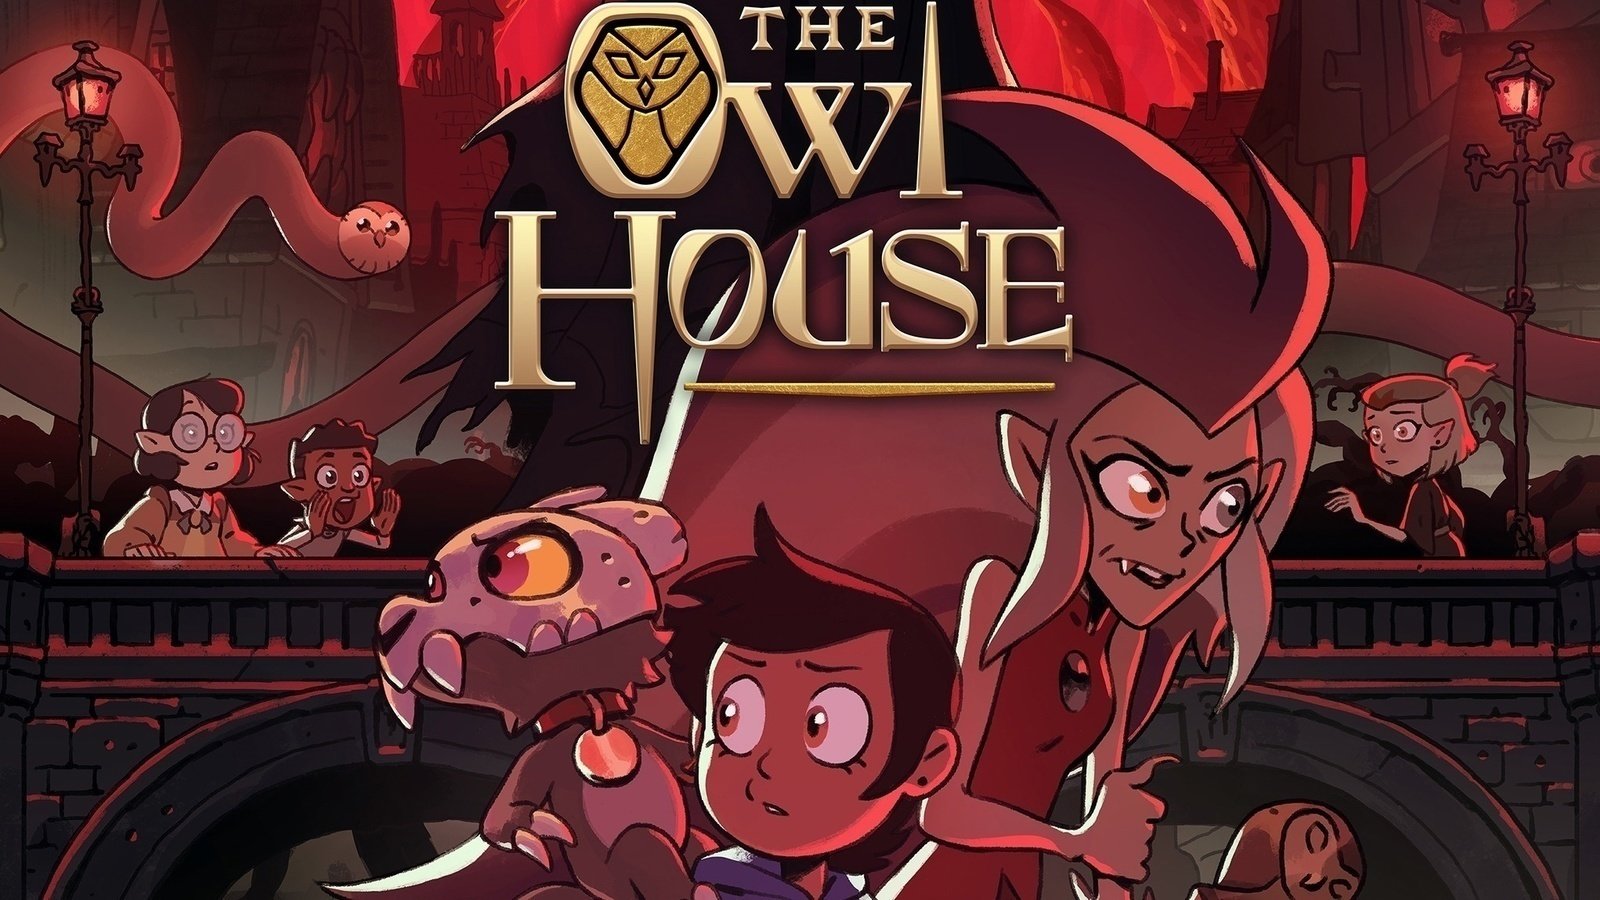 Choose your favorite character at The Owl House